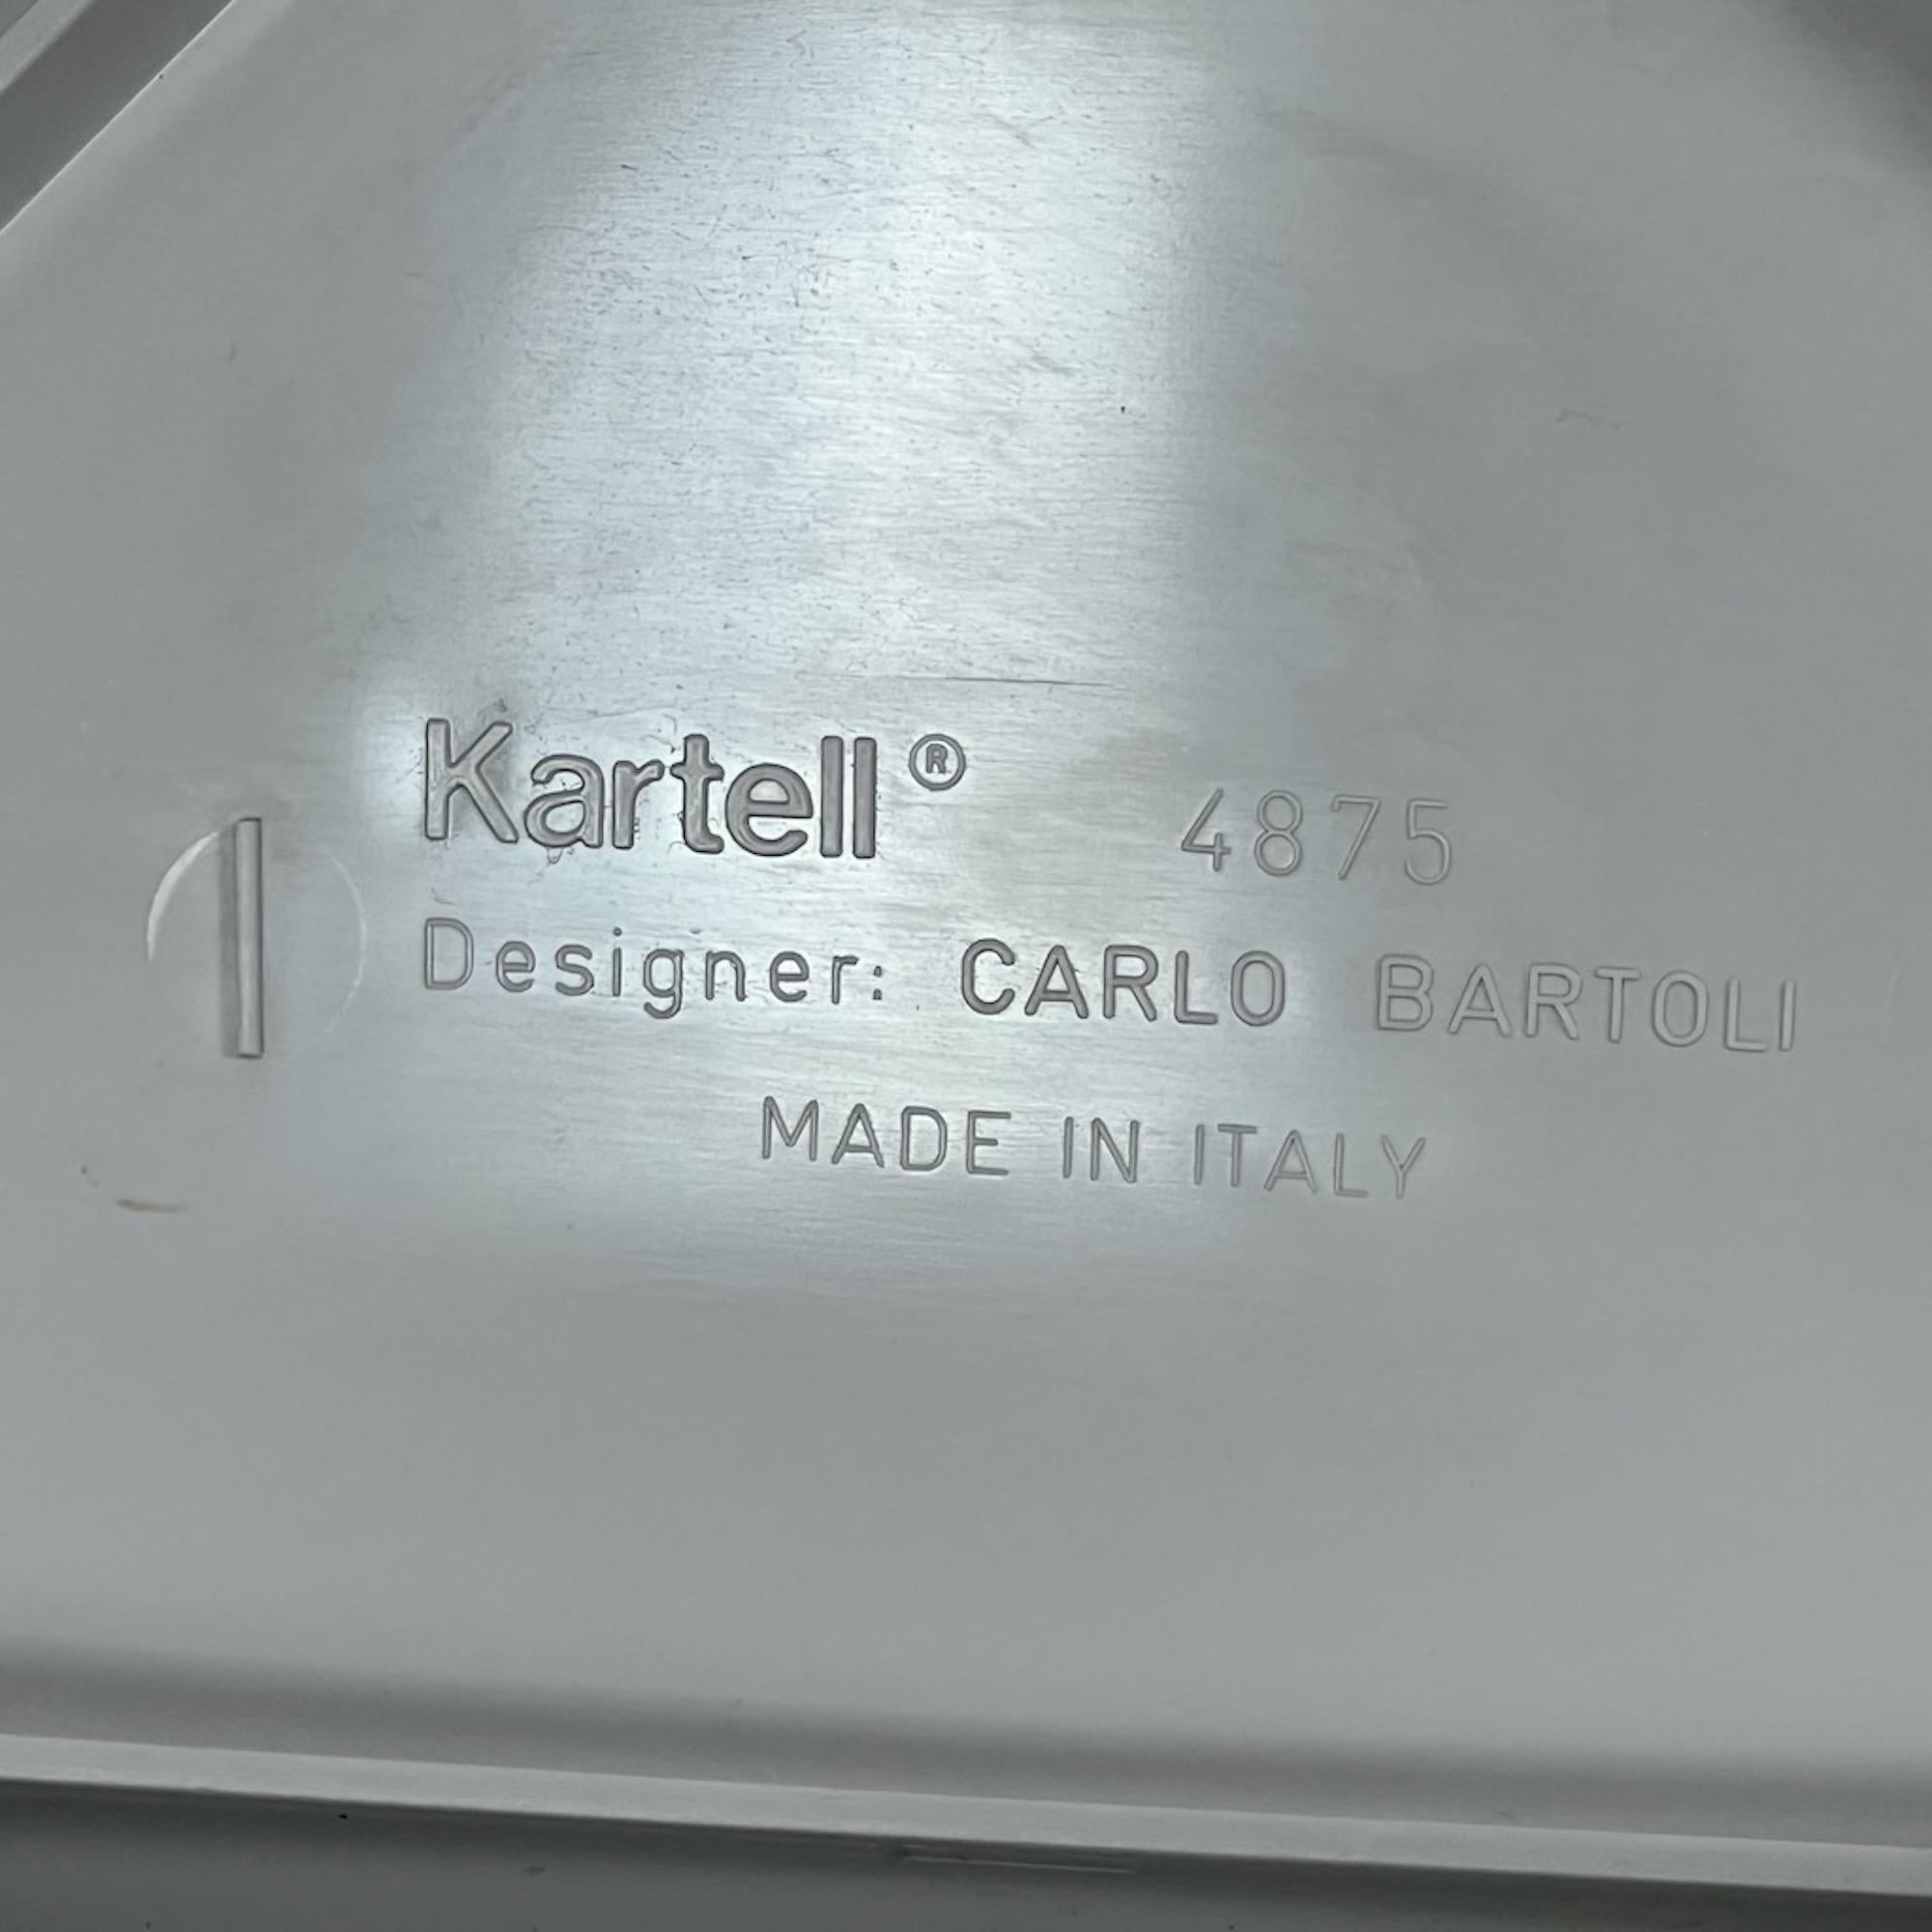 Kartell Chair Model 4875 by Carlo Bartoli - Glossy White - Italy, 1970s For Sale 1